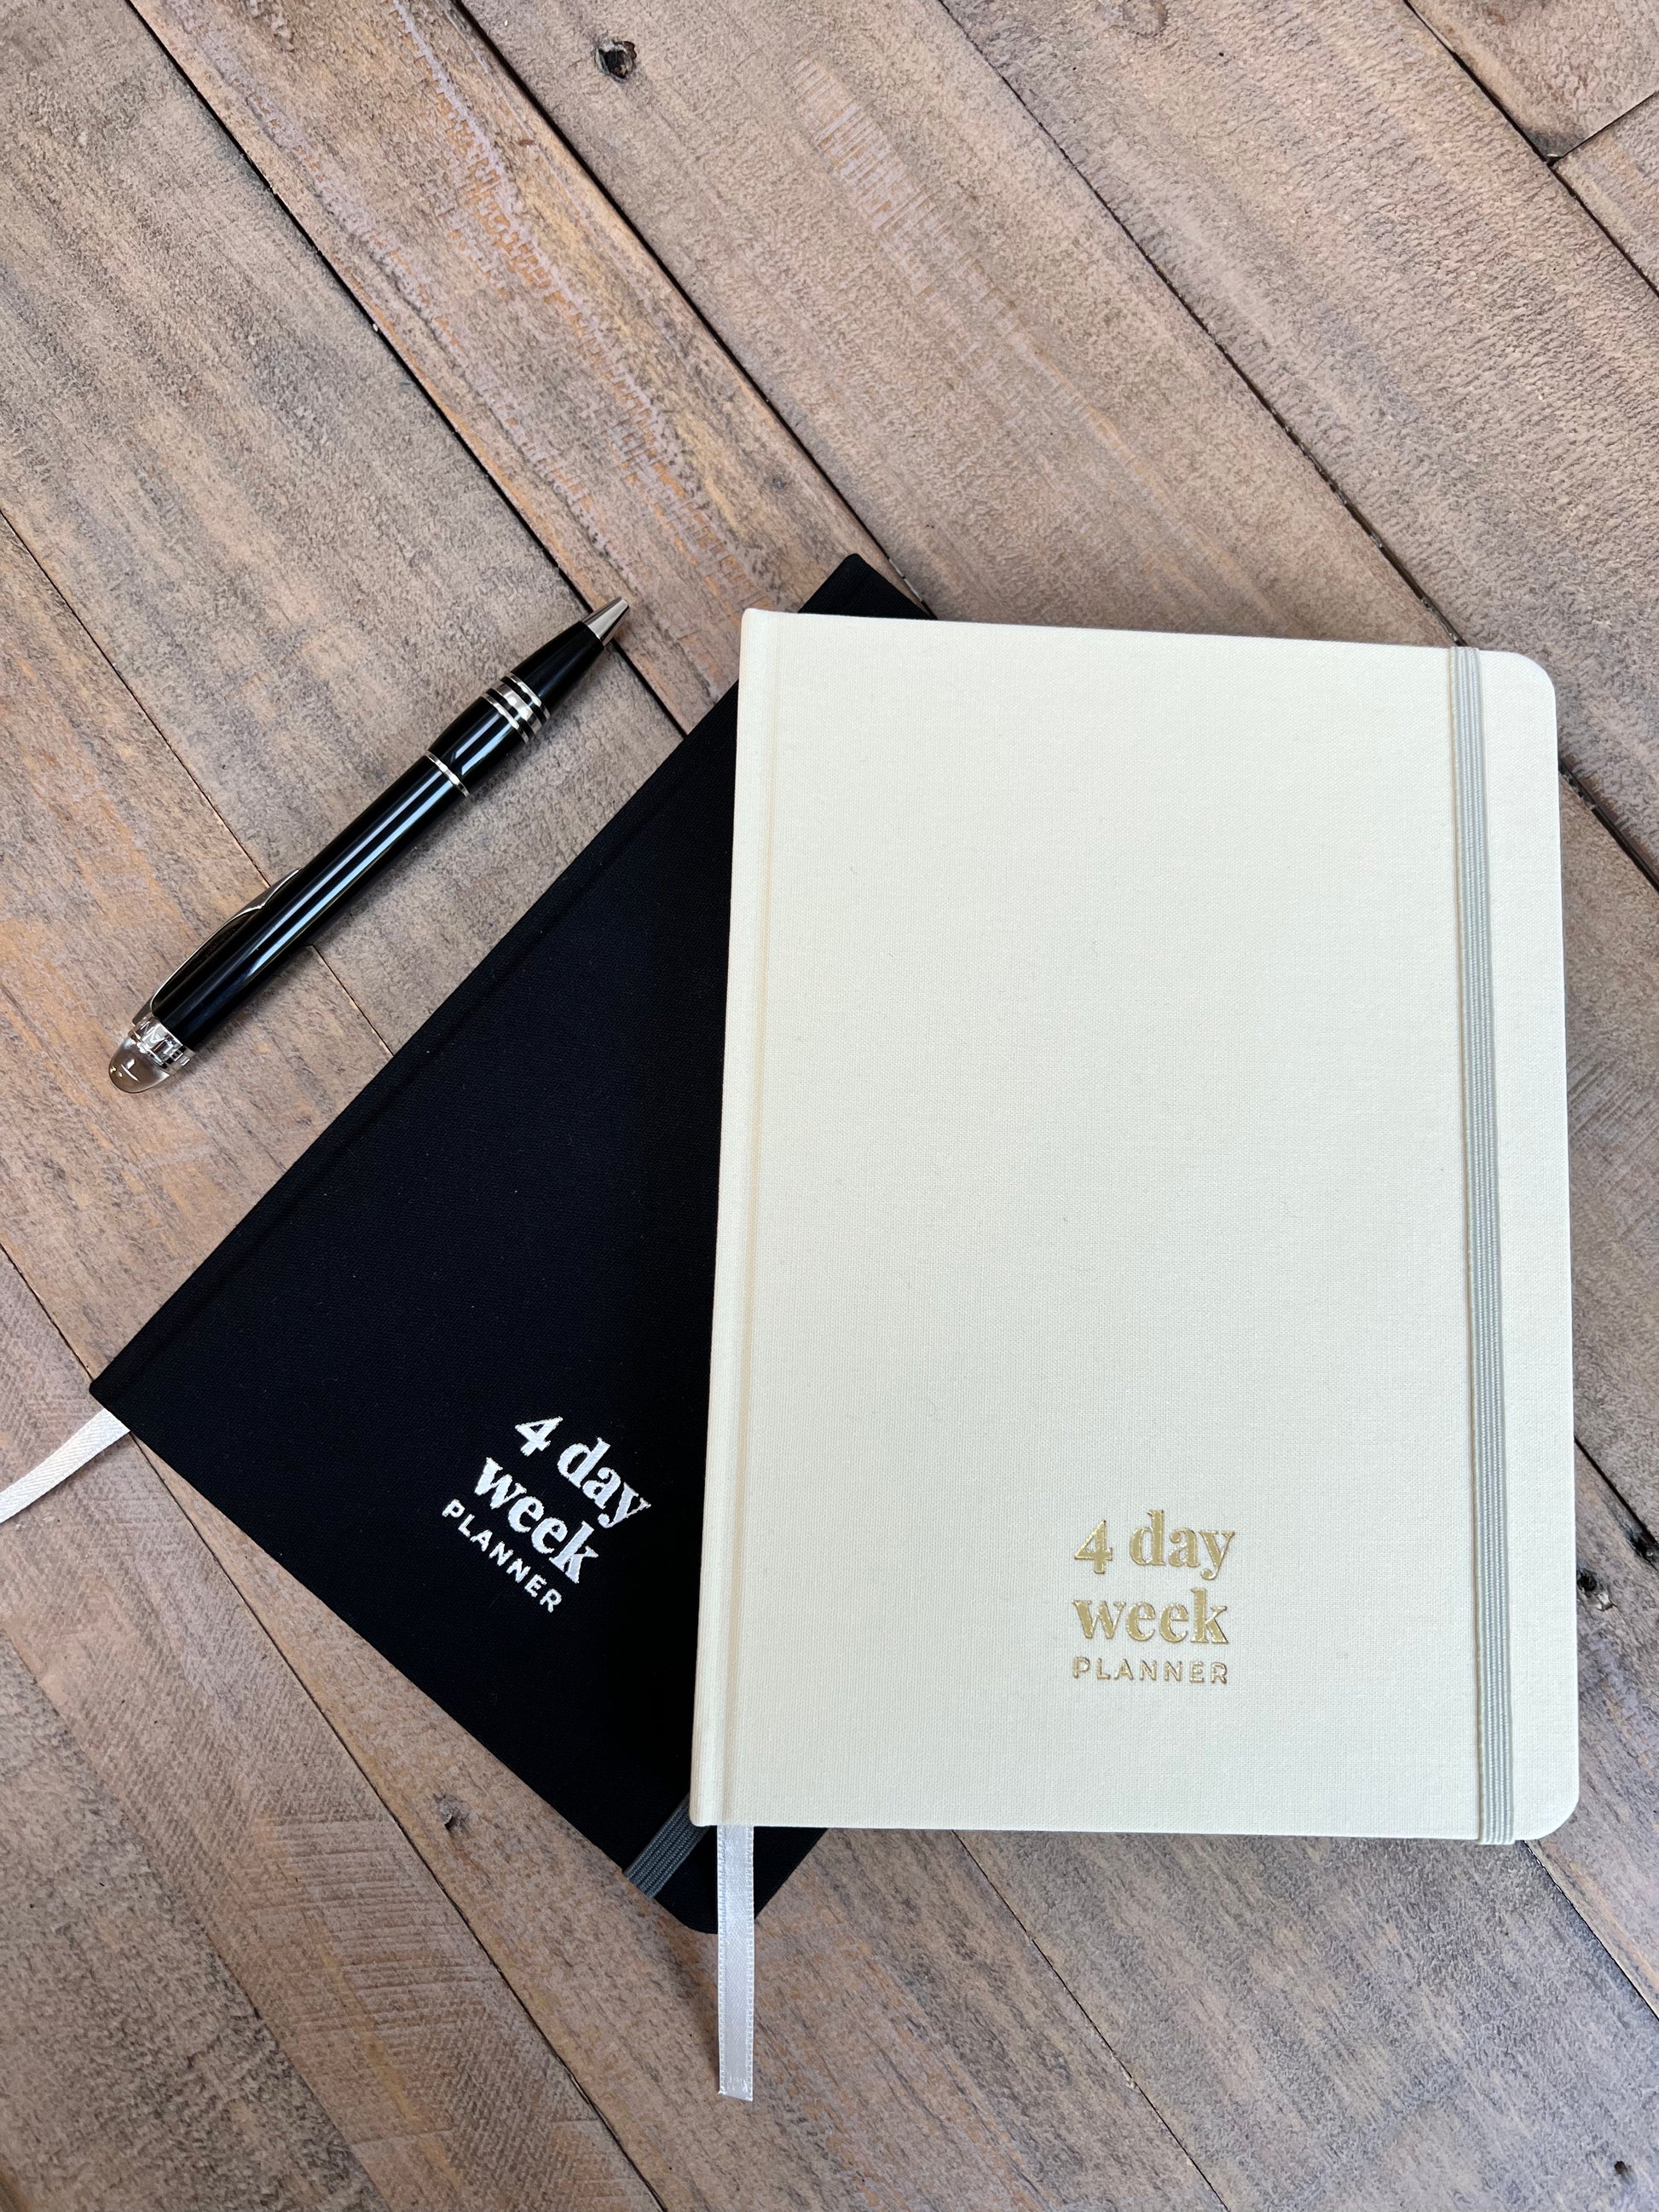 4 day week planners